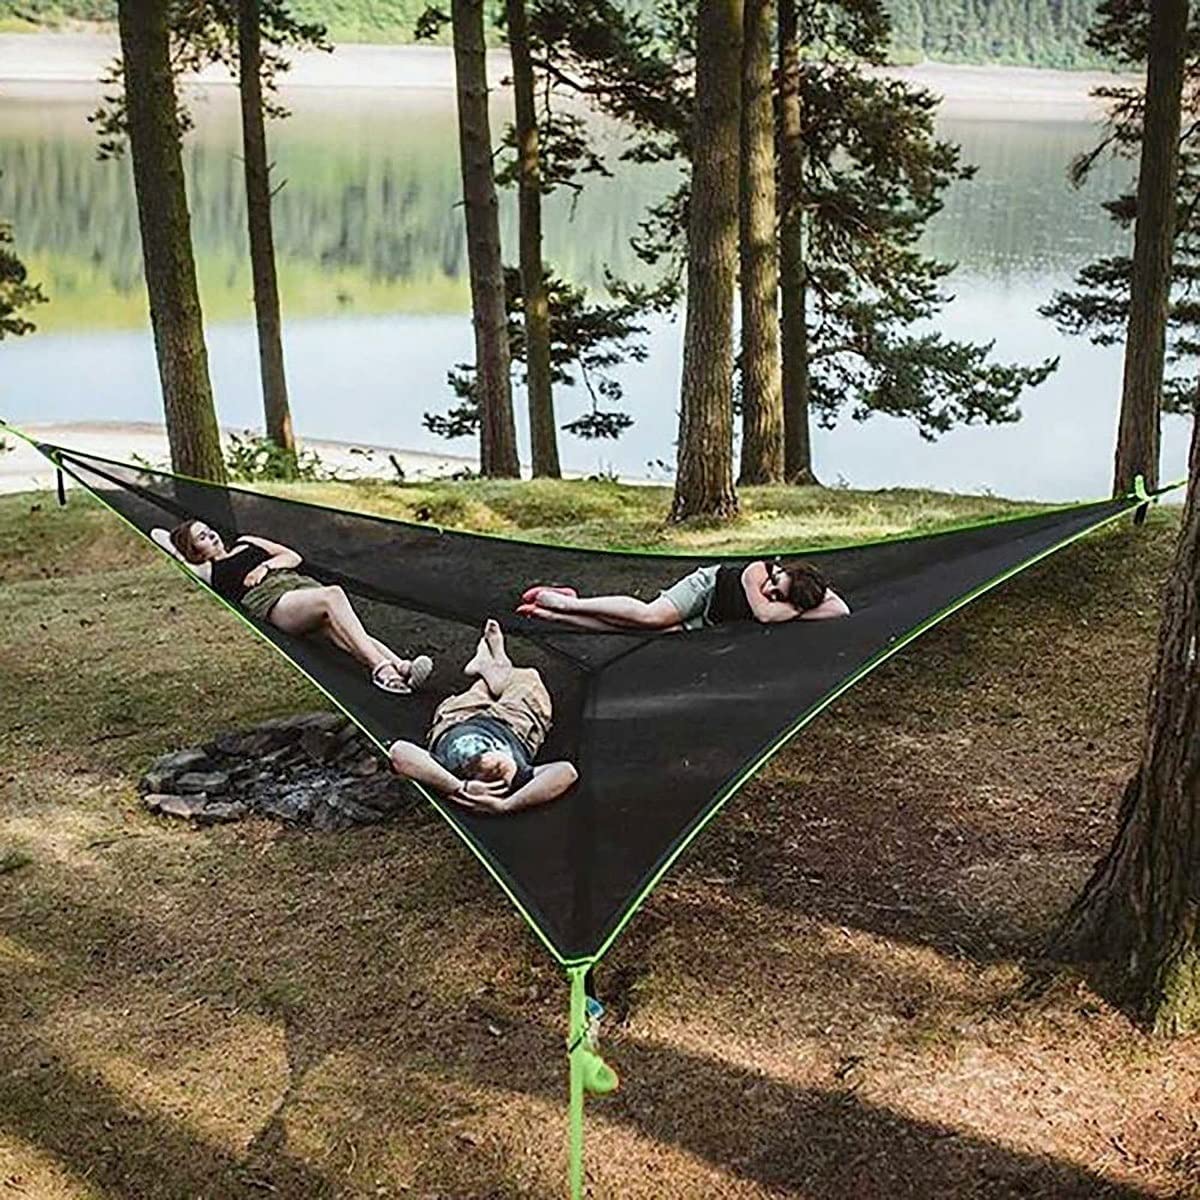 Triangle　Air　Sky　Portable　HEIBIN　Hammock,　Outdoor　Kids,　House　Outdoor　Giant　Aerial　Point,　Multi　Camping　Hammock　Person　Tree　Camping　Tent,　Hammock　Deck　Garden　Furniture,2.8*2.8*2.8m